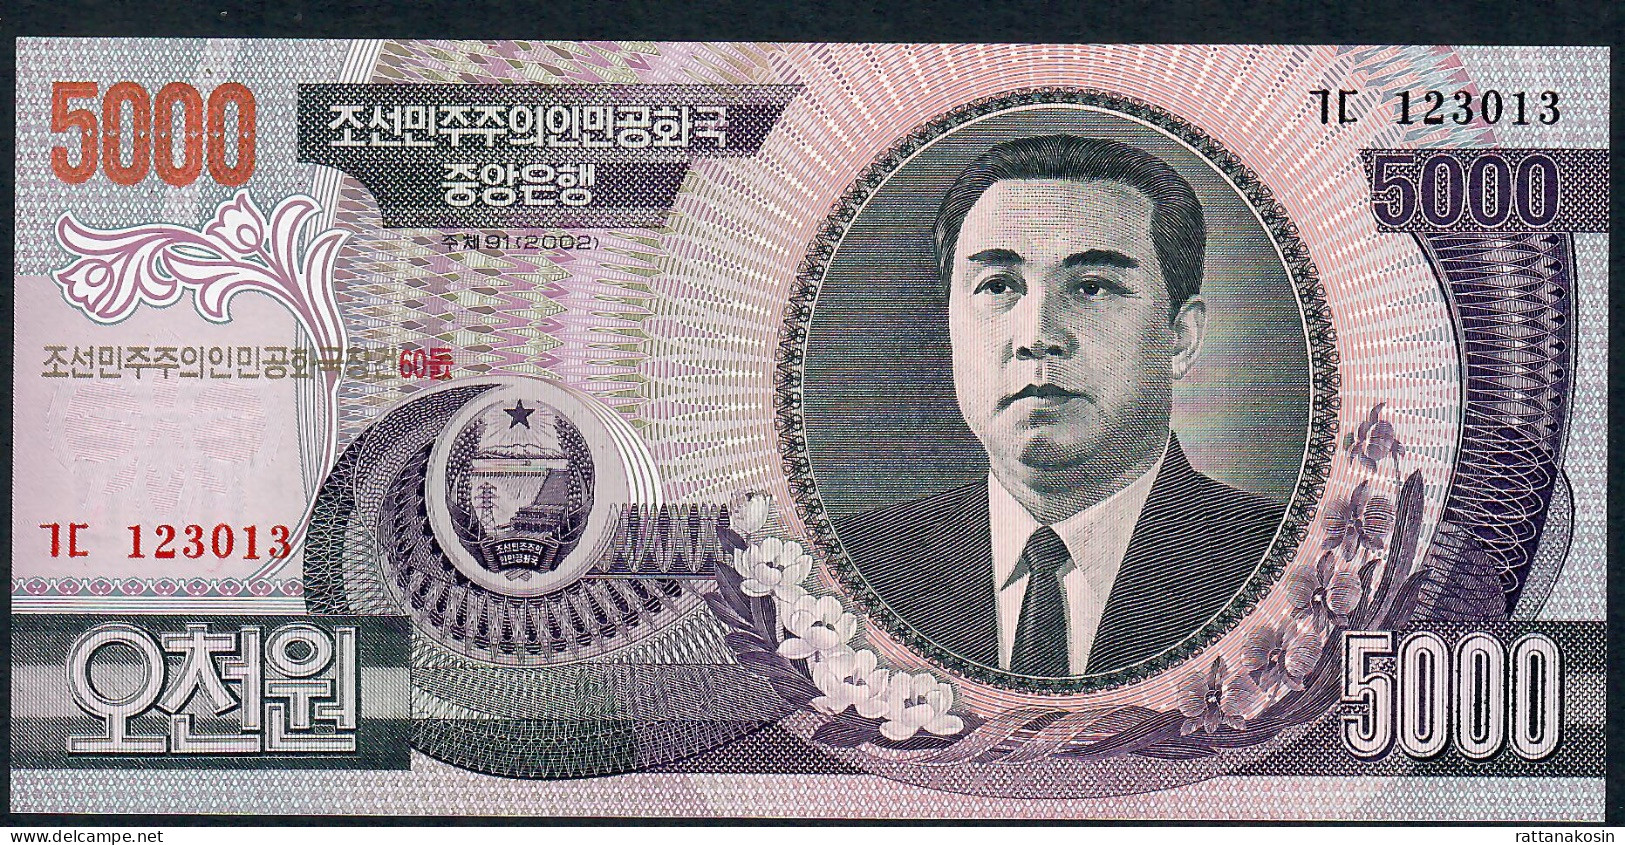 NORTH KOREA VERY RARE NLP (=B326) 5000 WON Dated 2002 Issued 2005 "60TH ANNIVERSARY LIBERATION" OVPRT On B321 (P46) UNC. - Corea Del Nord